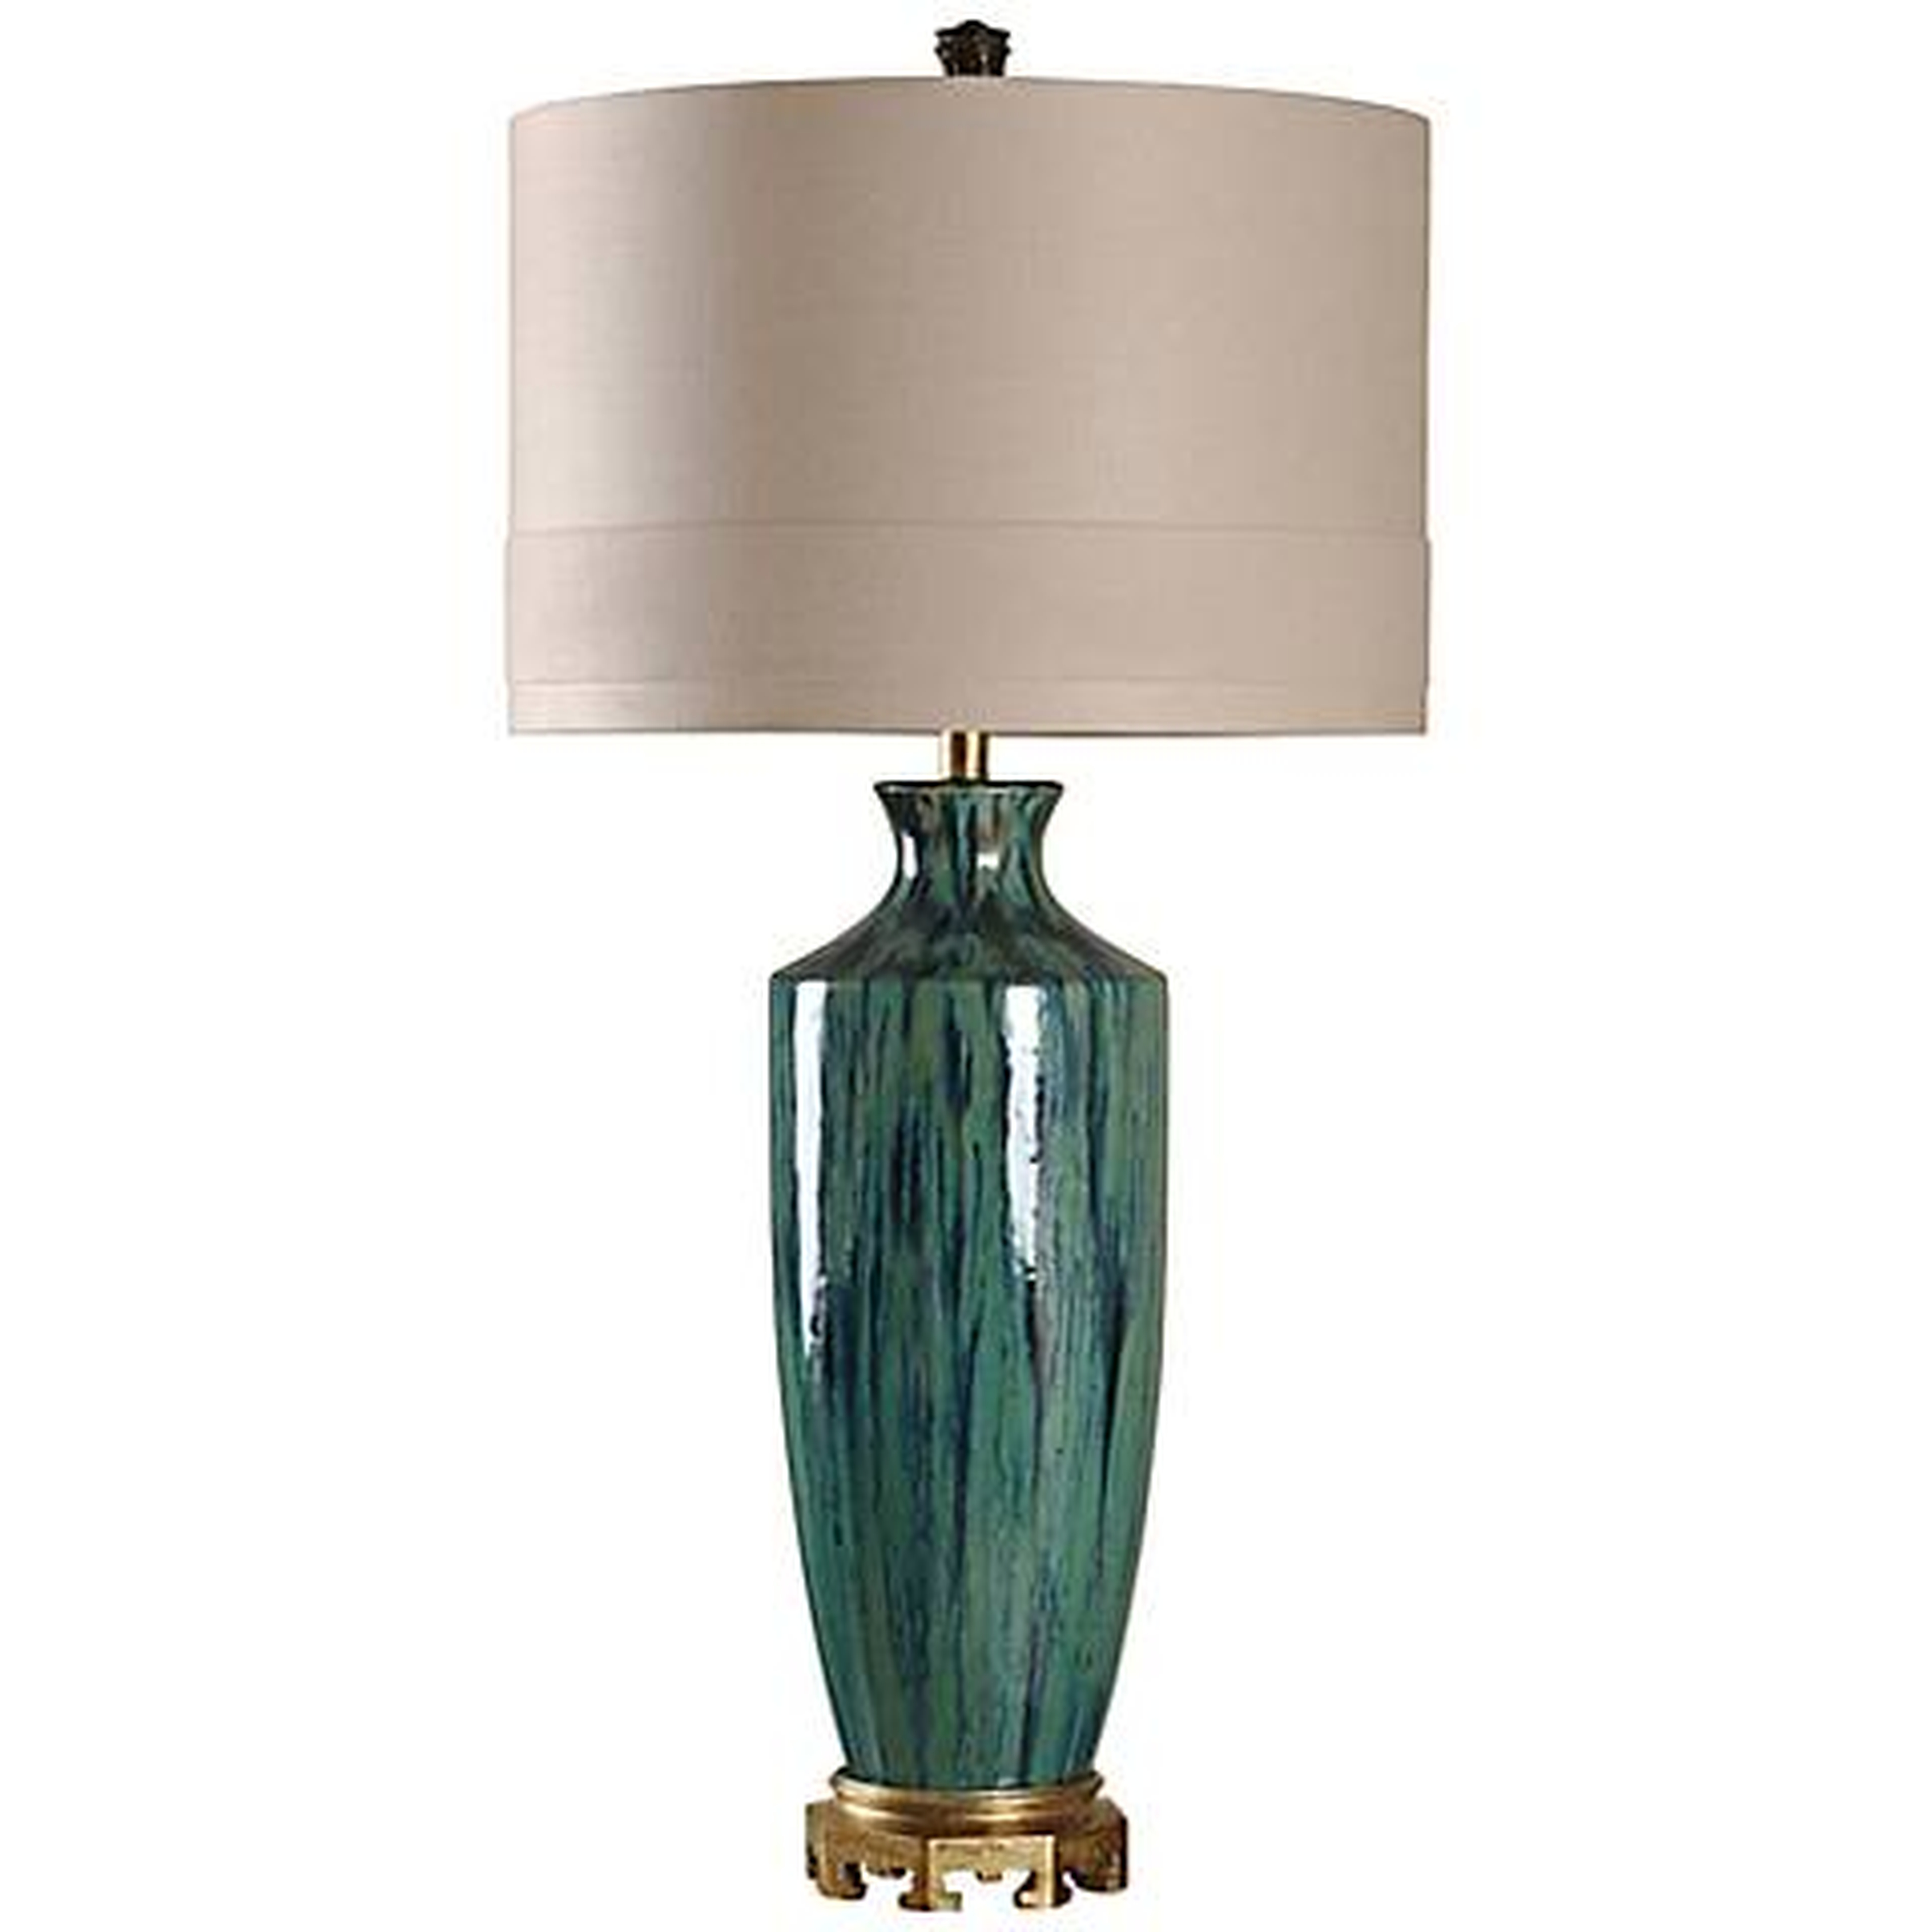 Manoca Reactive Glaze Blue and Green Ceramic Table Lamp - Lamps Plus